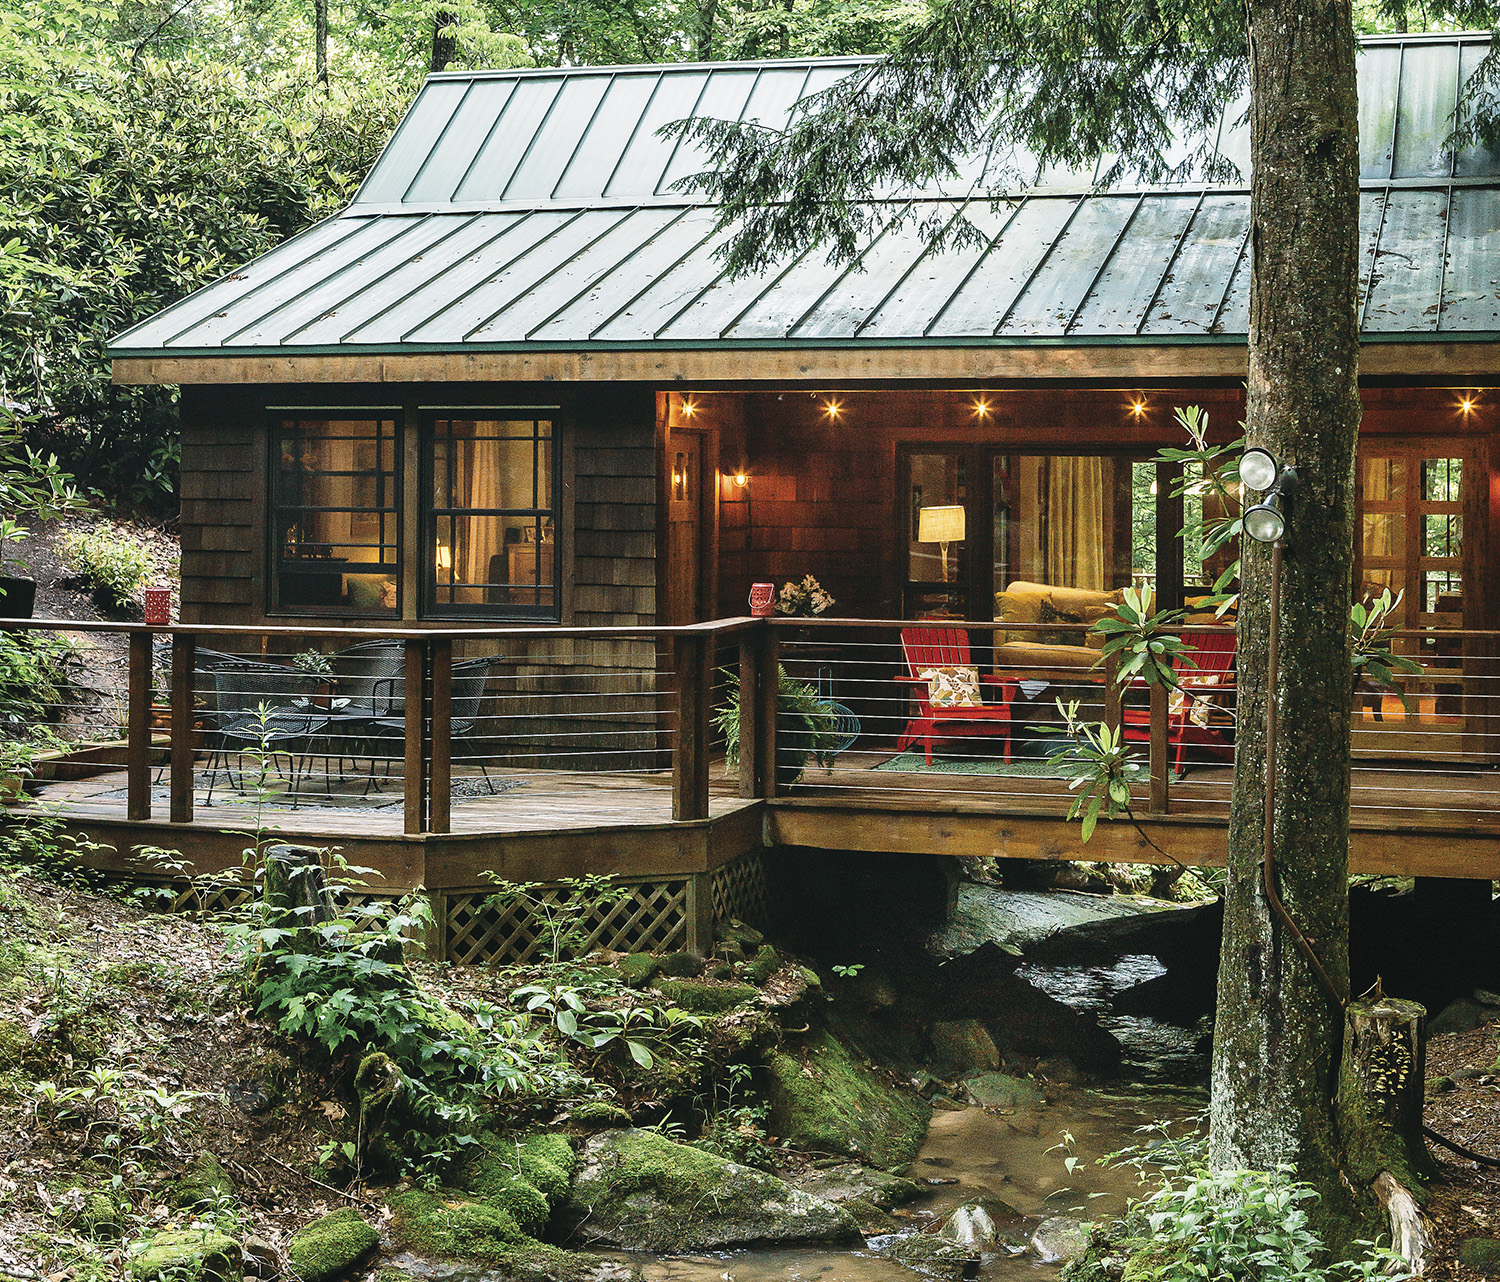 Laura and Matt Belanger’s secluded home boasts an 800-square-foot deck overlooking the creek. Photo by Tim Robison